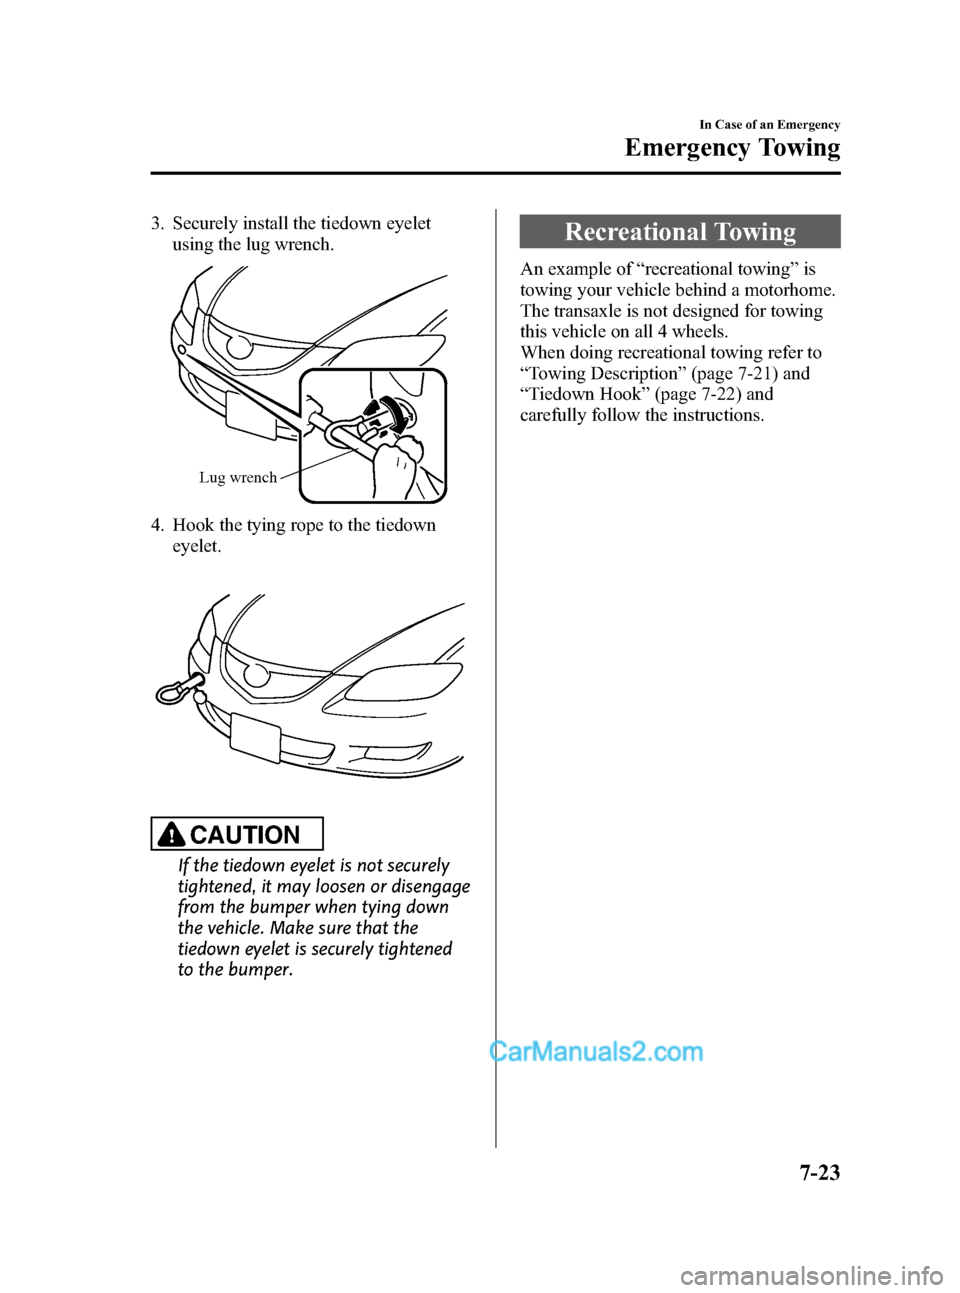 MAZDA MODEL MAZDASPEED 3 2008   (in English) Service Manual Black plate (267,1)
3. Securely install the tiedown eyelet
using the lug wrench.
Lug wrench
4. Hook the tying rope to the tiedown
eyelet.
CAUTION
If the tiedown eyelet is not securely
tightened, it ma